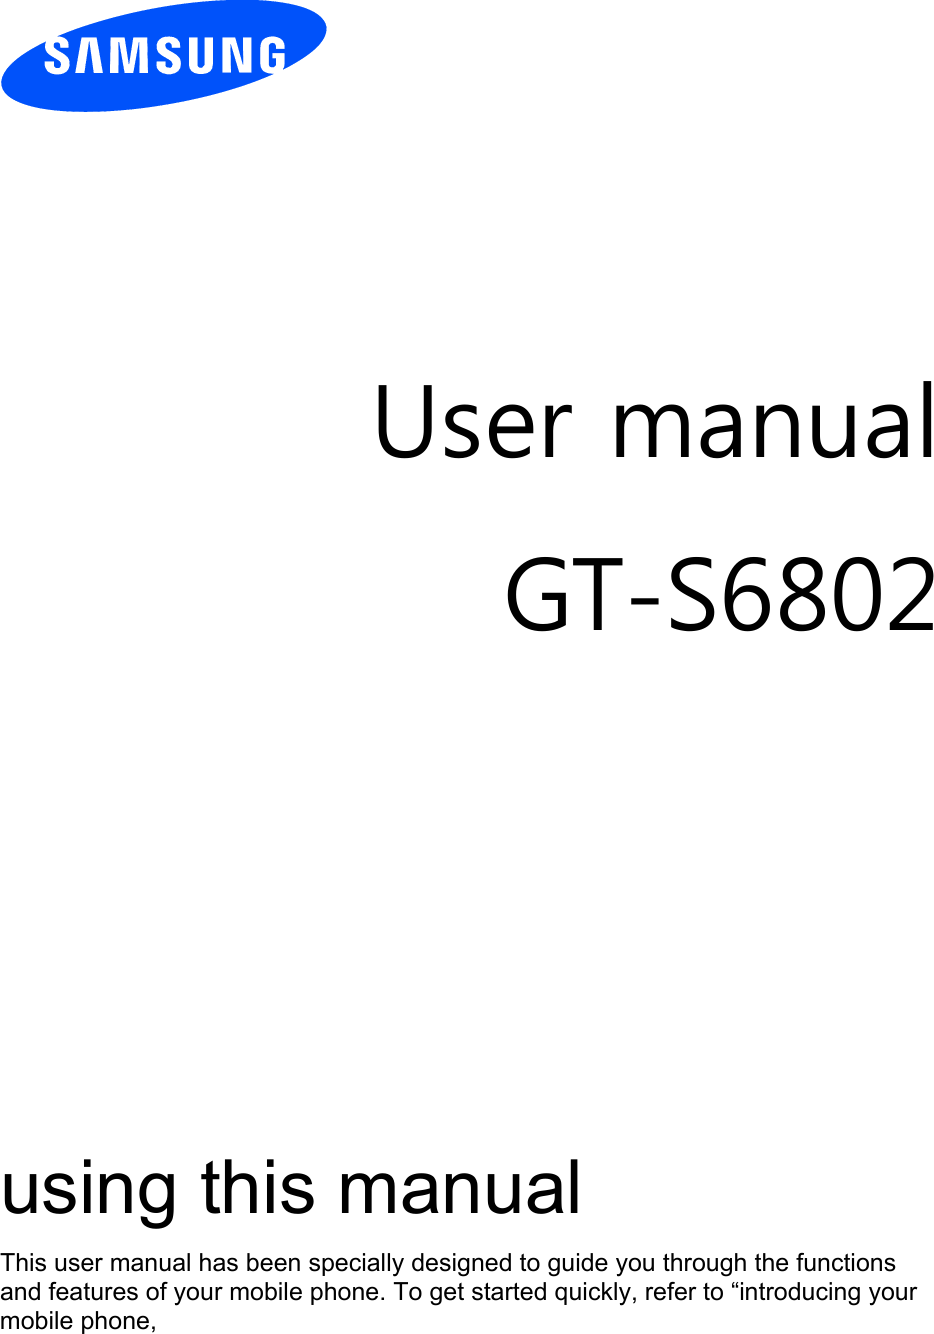          User manual GT-S6802              using this manual This user manual has been specially designed to guide you through the functions and features of your mobile phone. To get started quickly, refer to “introducing your mobile phone, 